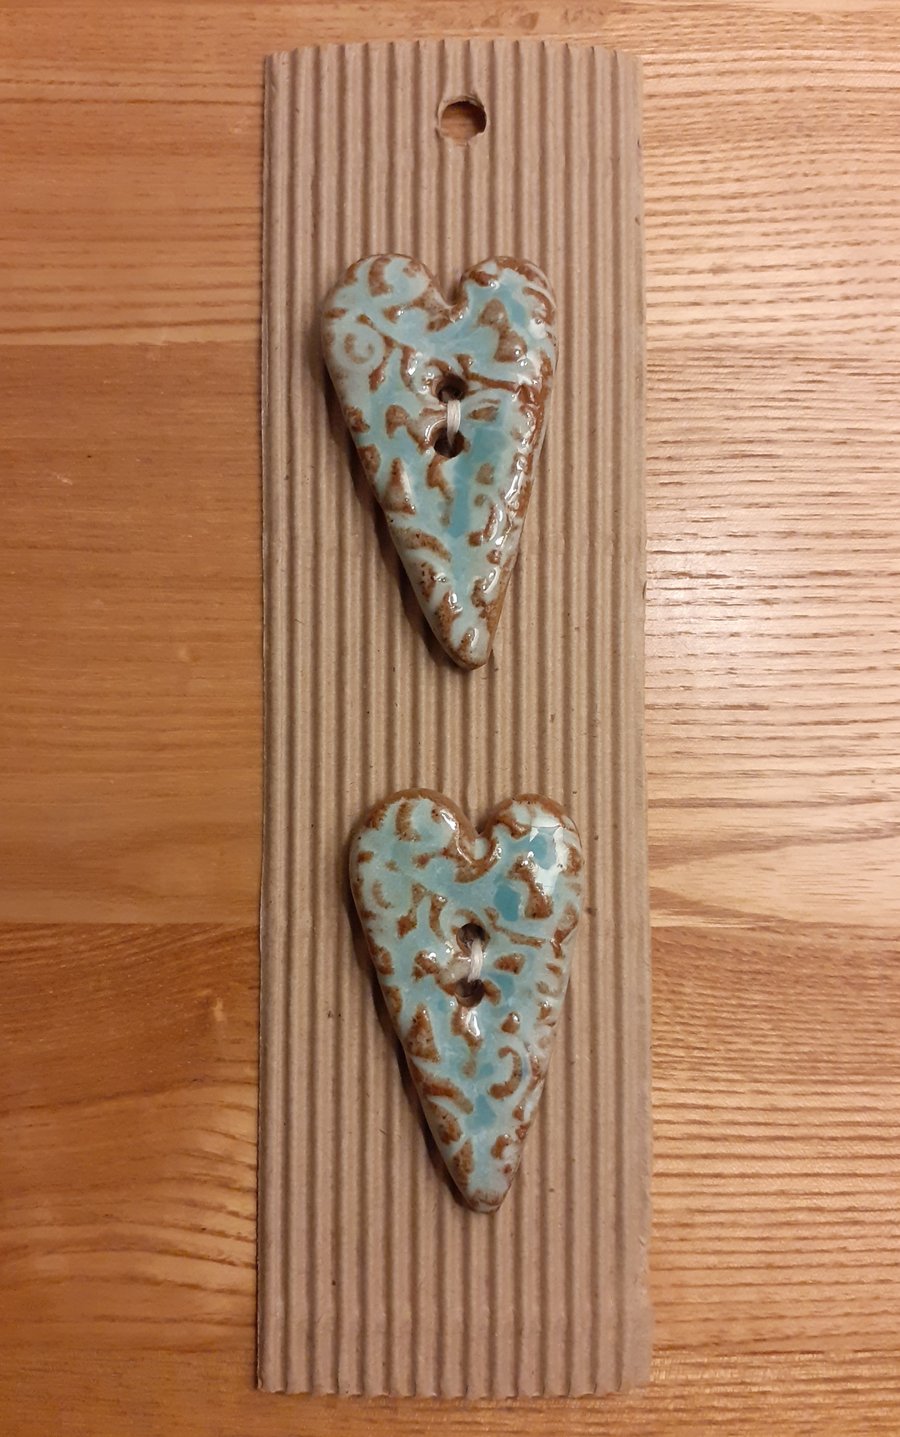 Long patterned ceramic heart buttons